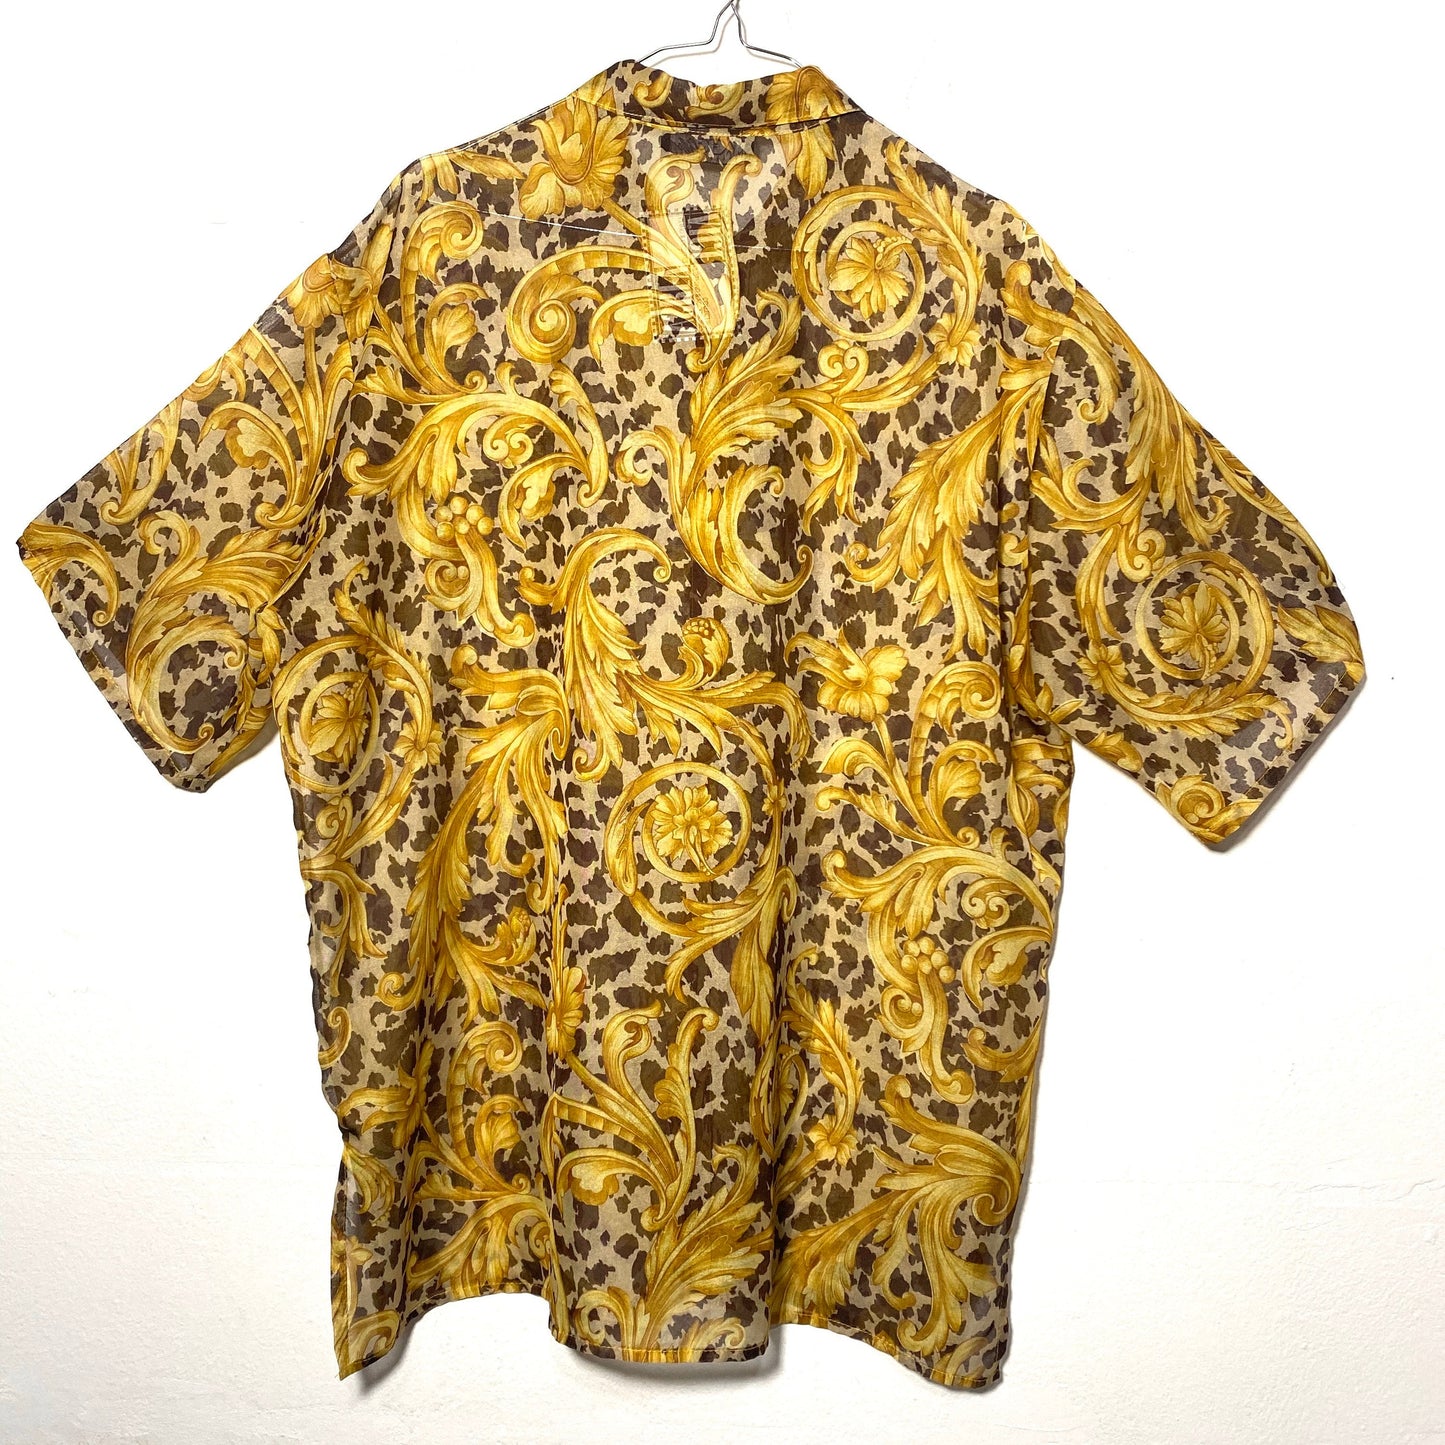 Baroque Versace style cheetah / achantus leaves print shirt made in Italy by Magic life, 80s mint condition